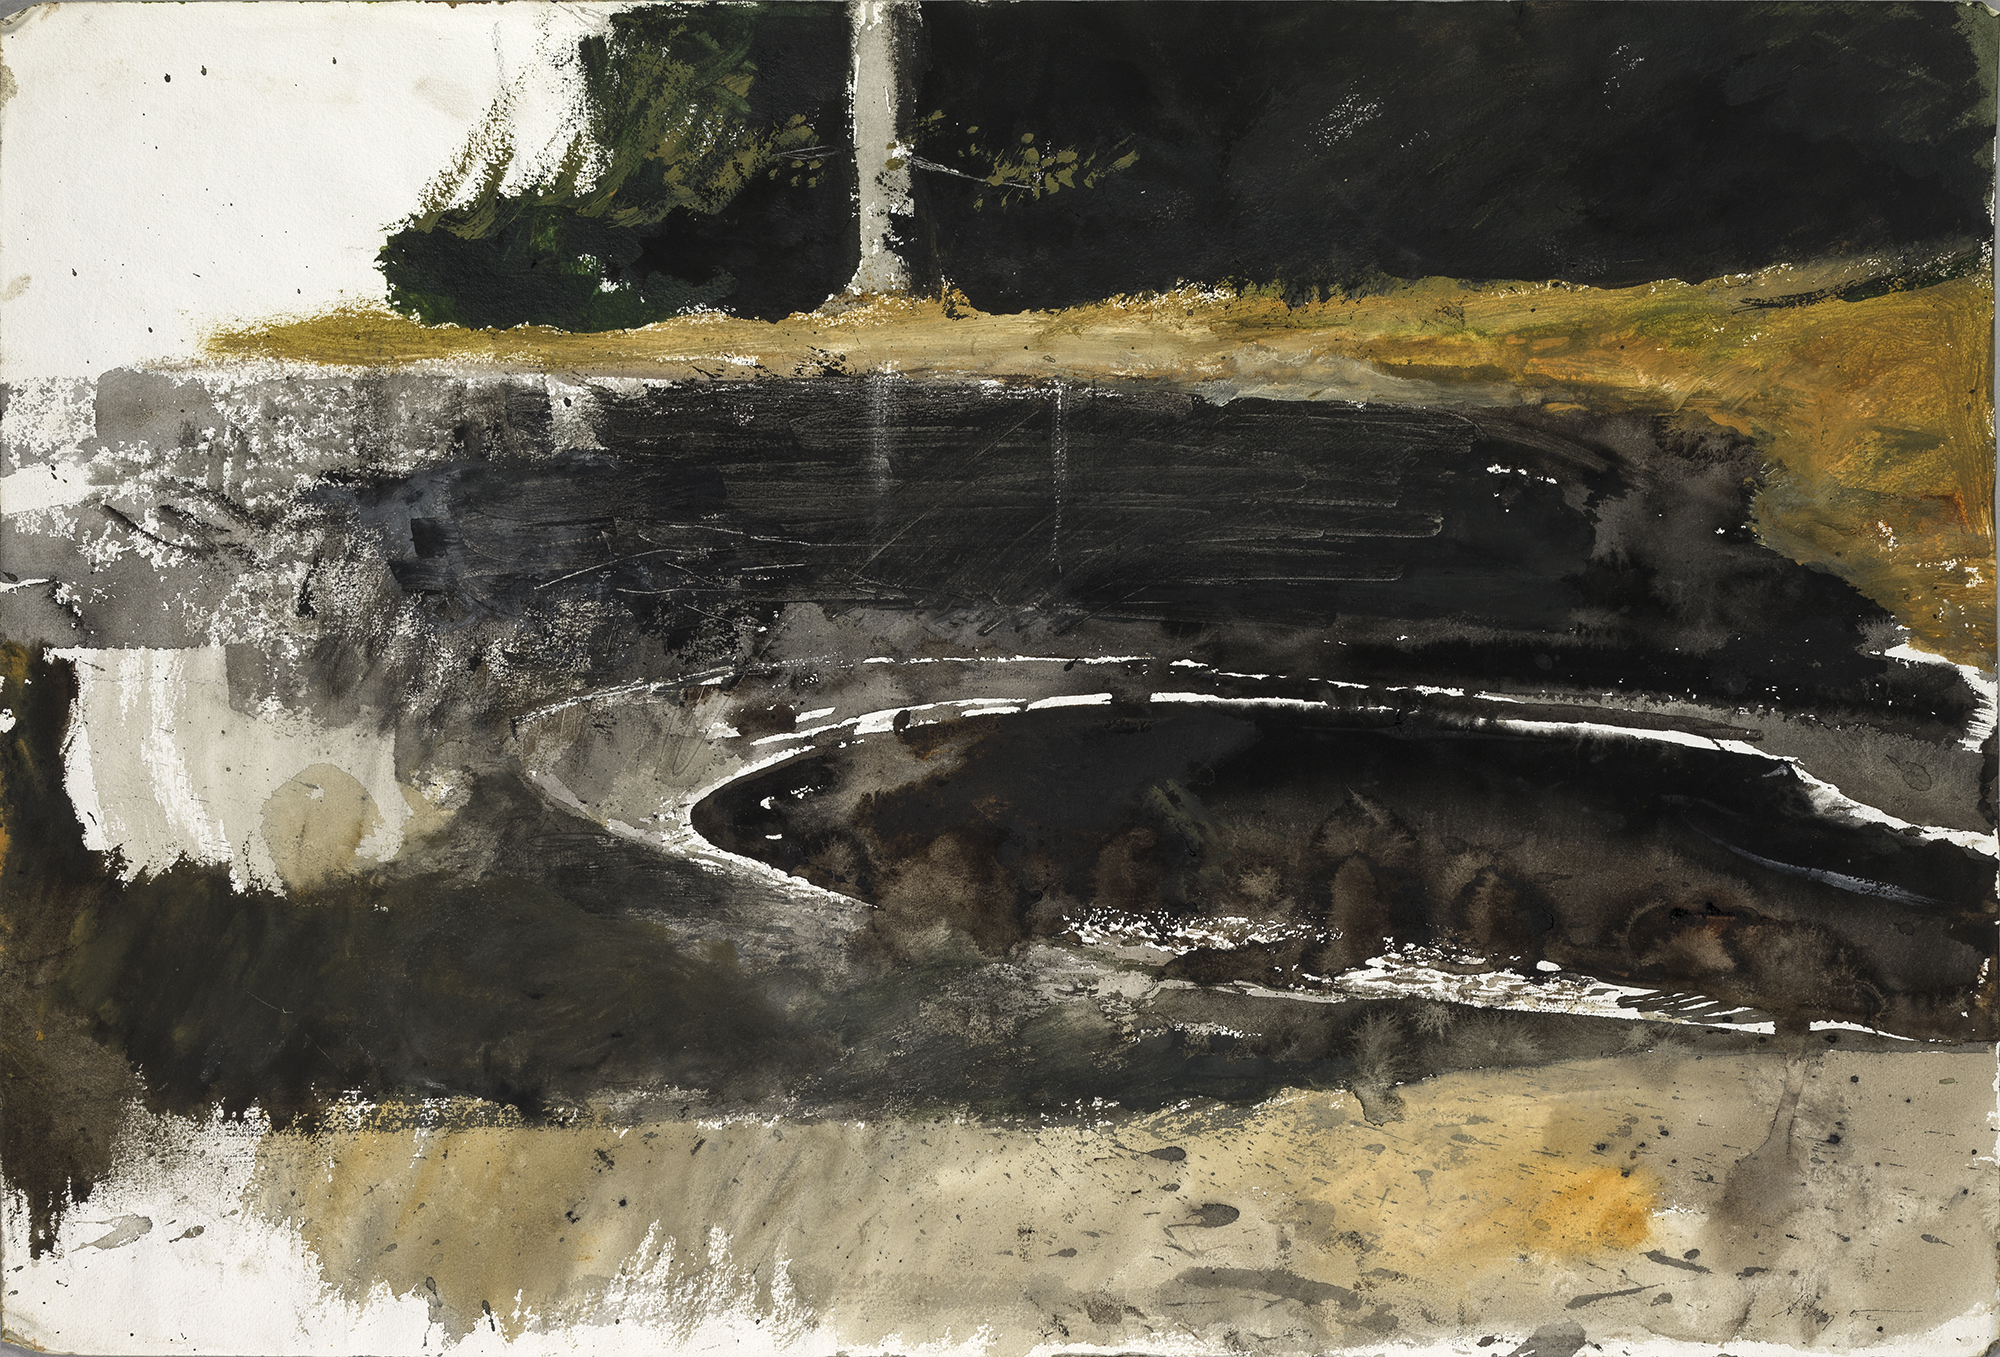 Andrew Wyeth, Ice Pool Study, 1969, watercolor on paper. Collection of the Wyeth Foundation for American Art, B1837. © 2023 Wyeth Foundation for American Art/Artists Rights Society (ARS) New York